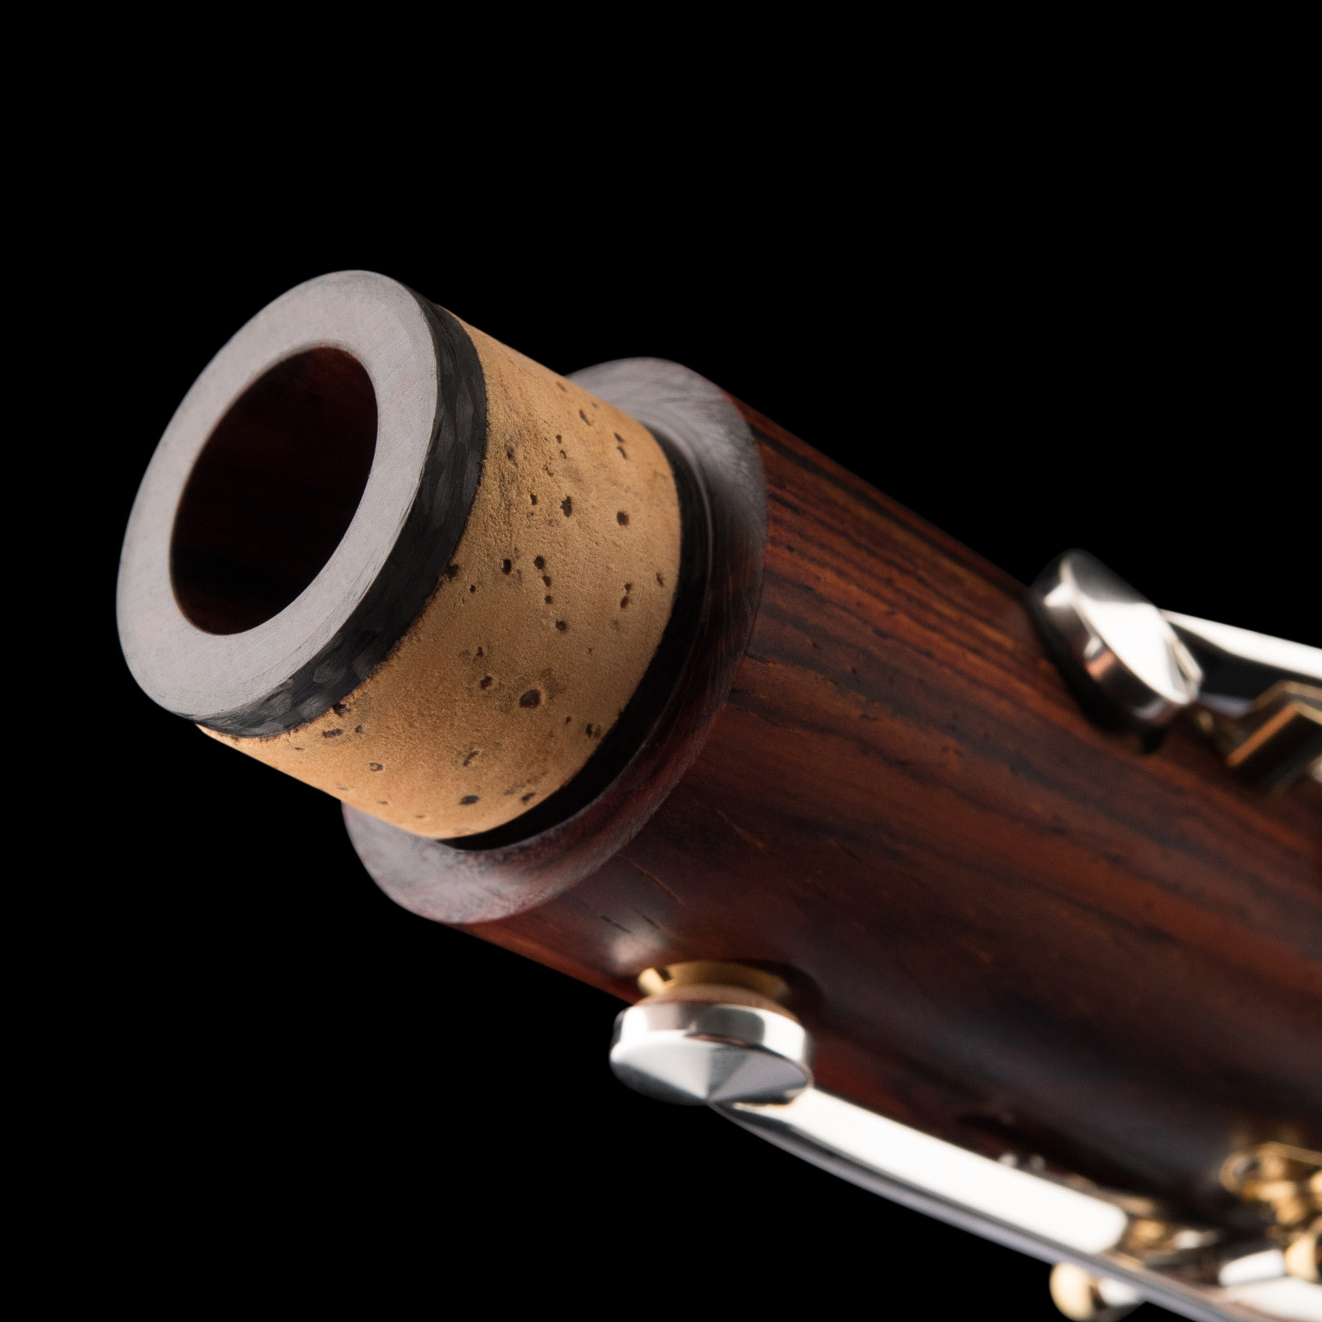 Caring for Wooden Clarinets